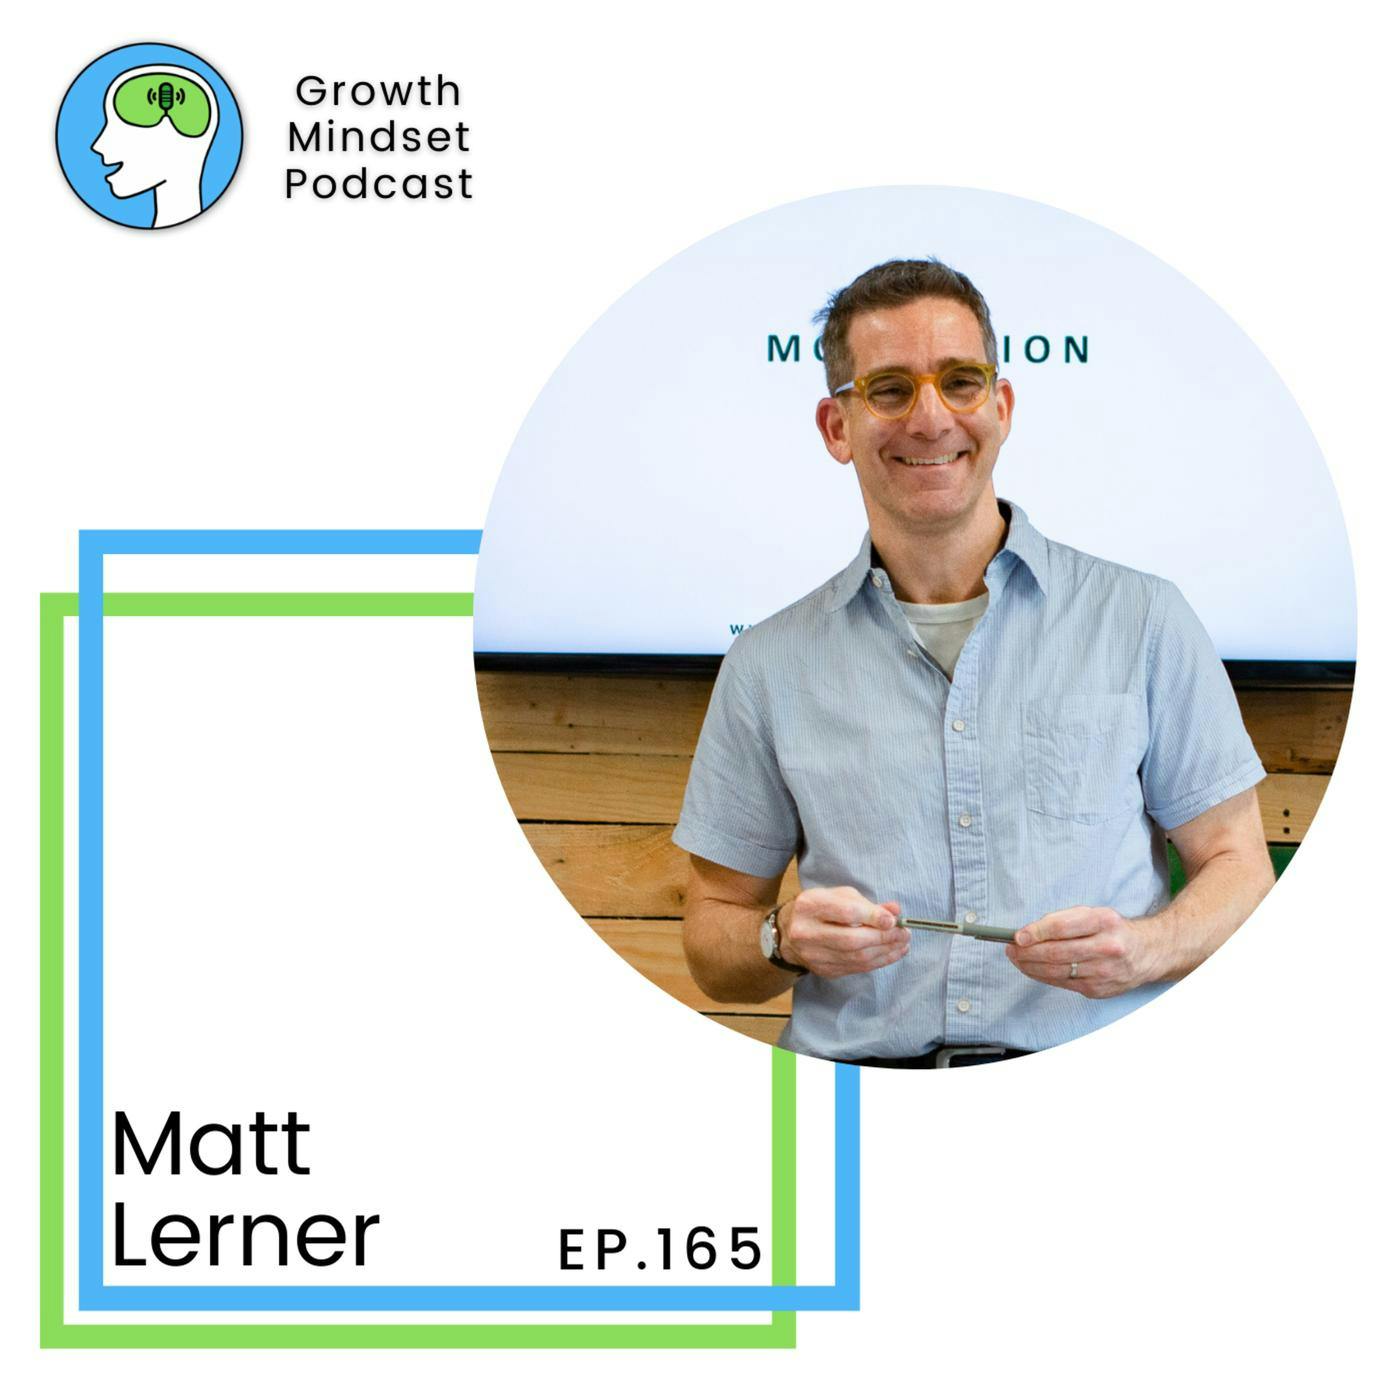 166: Applying Growth Mindset to business, startups and life - Matt Lerner, Founder Startup Core Strengths